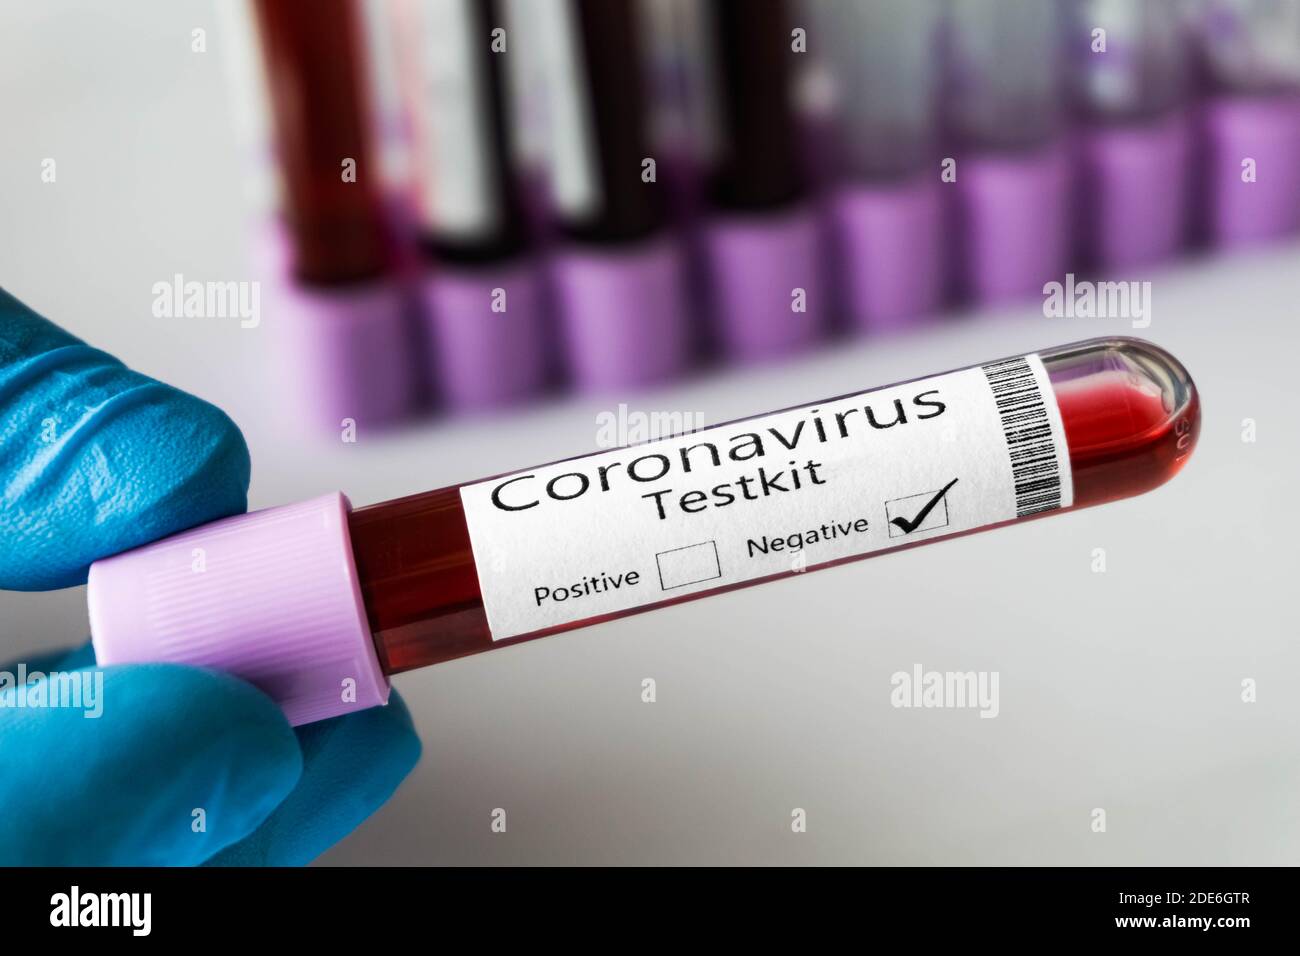 Top view of test tube containing blood sample negative for novel coronavirus outbreak. Covid-19 pandemic. Stock Photo